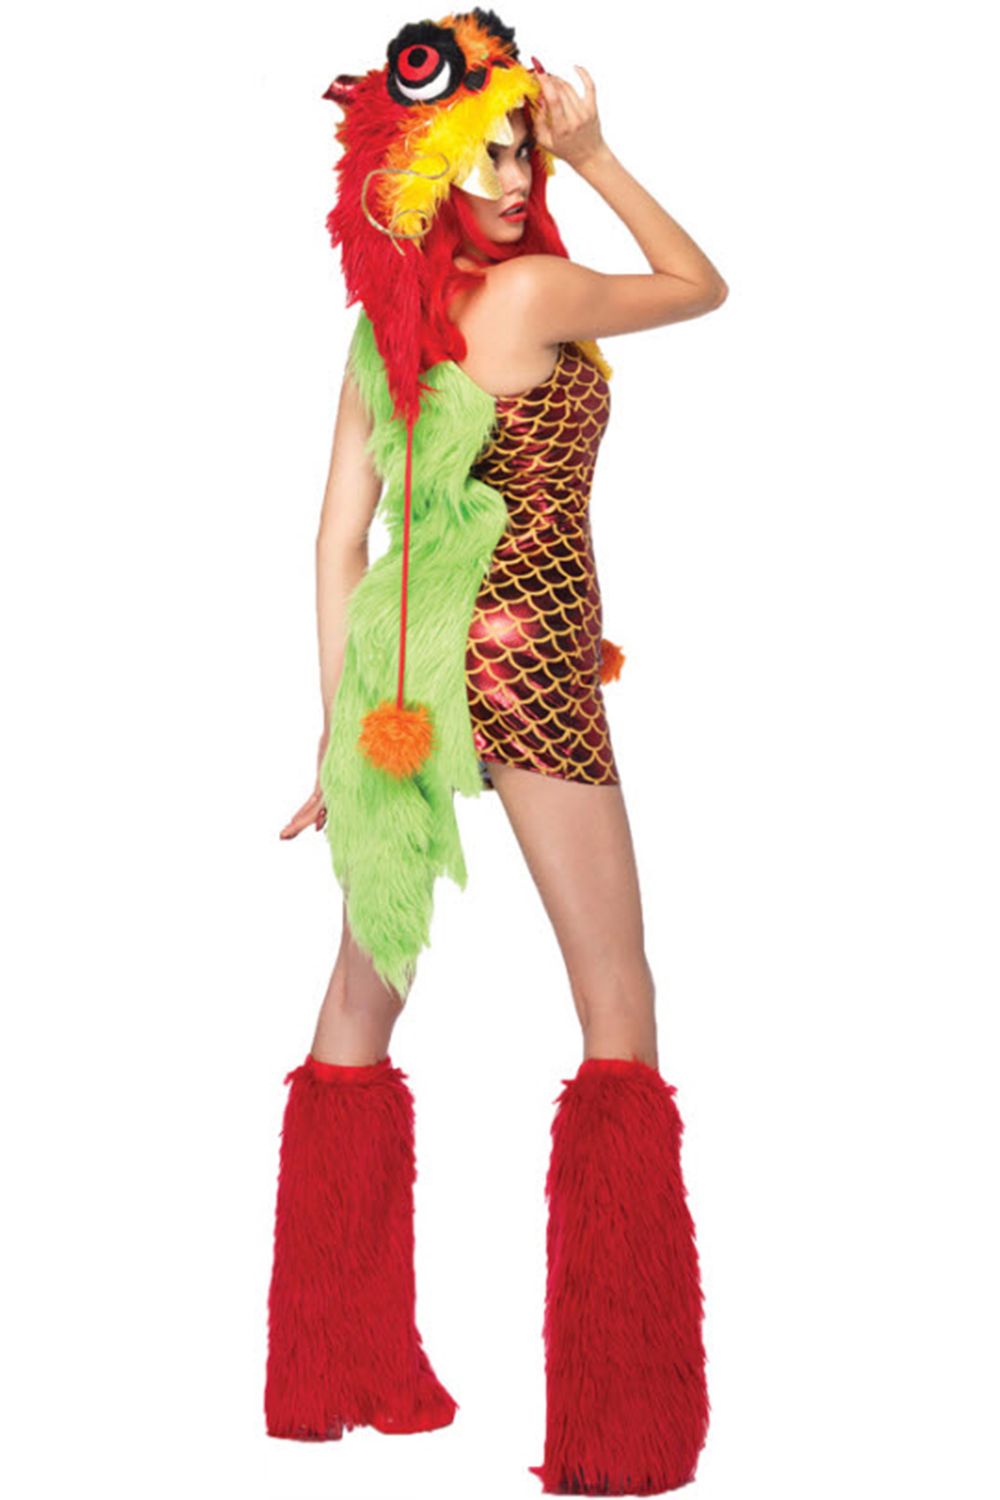 Ridiculous Sexy Halloween Costumes for Women pic